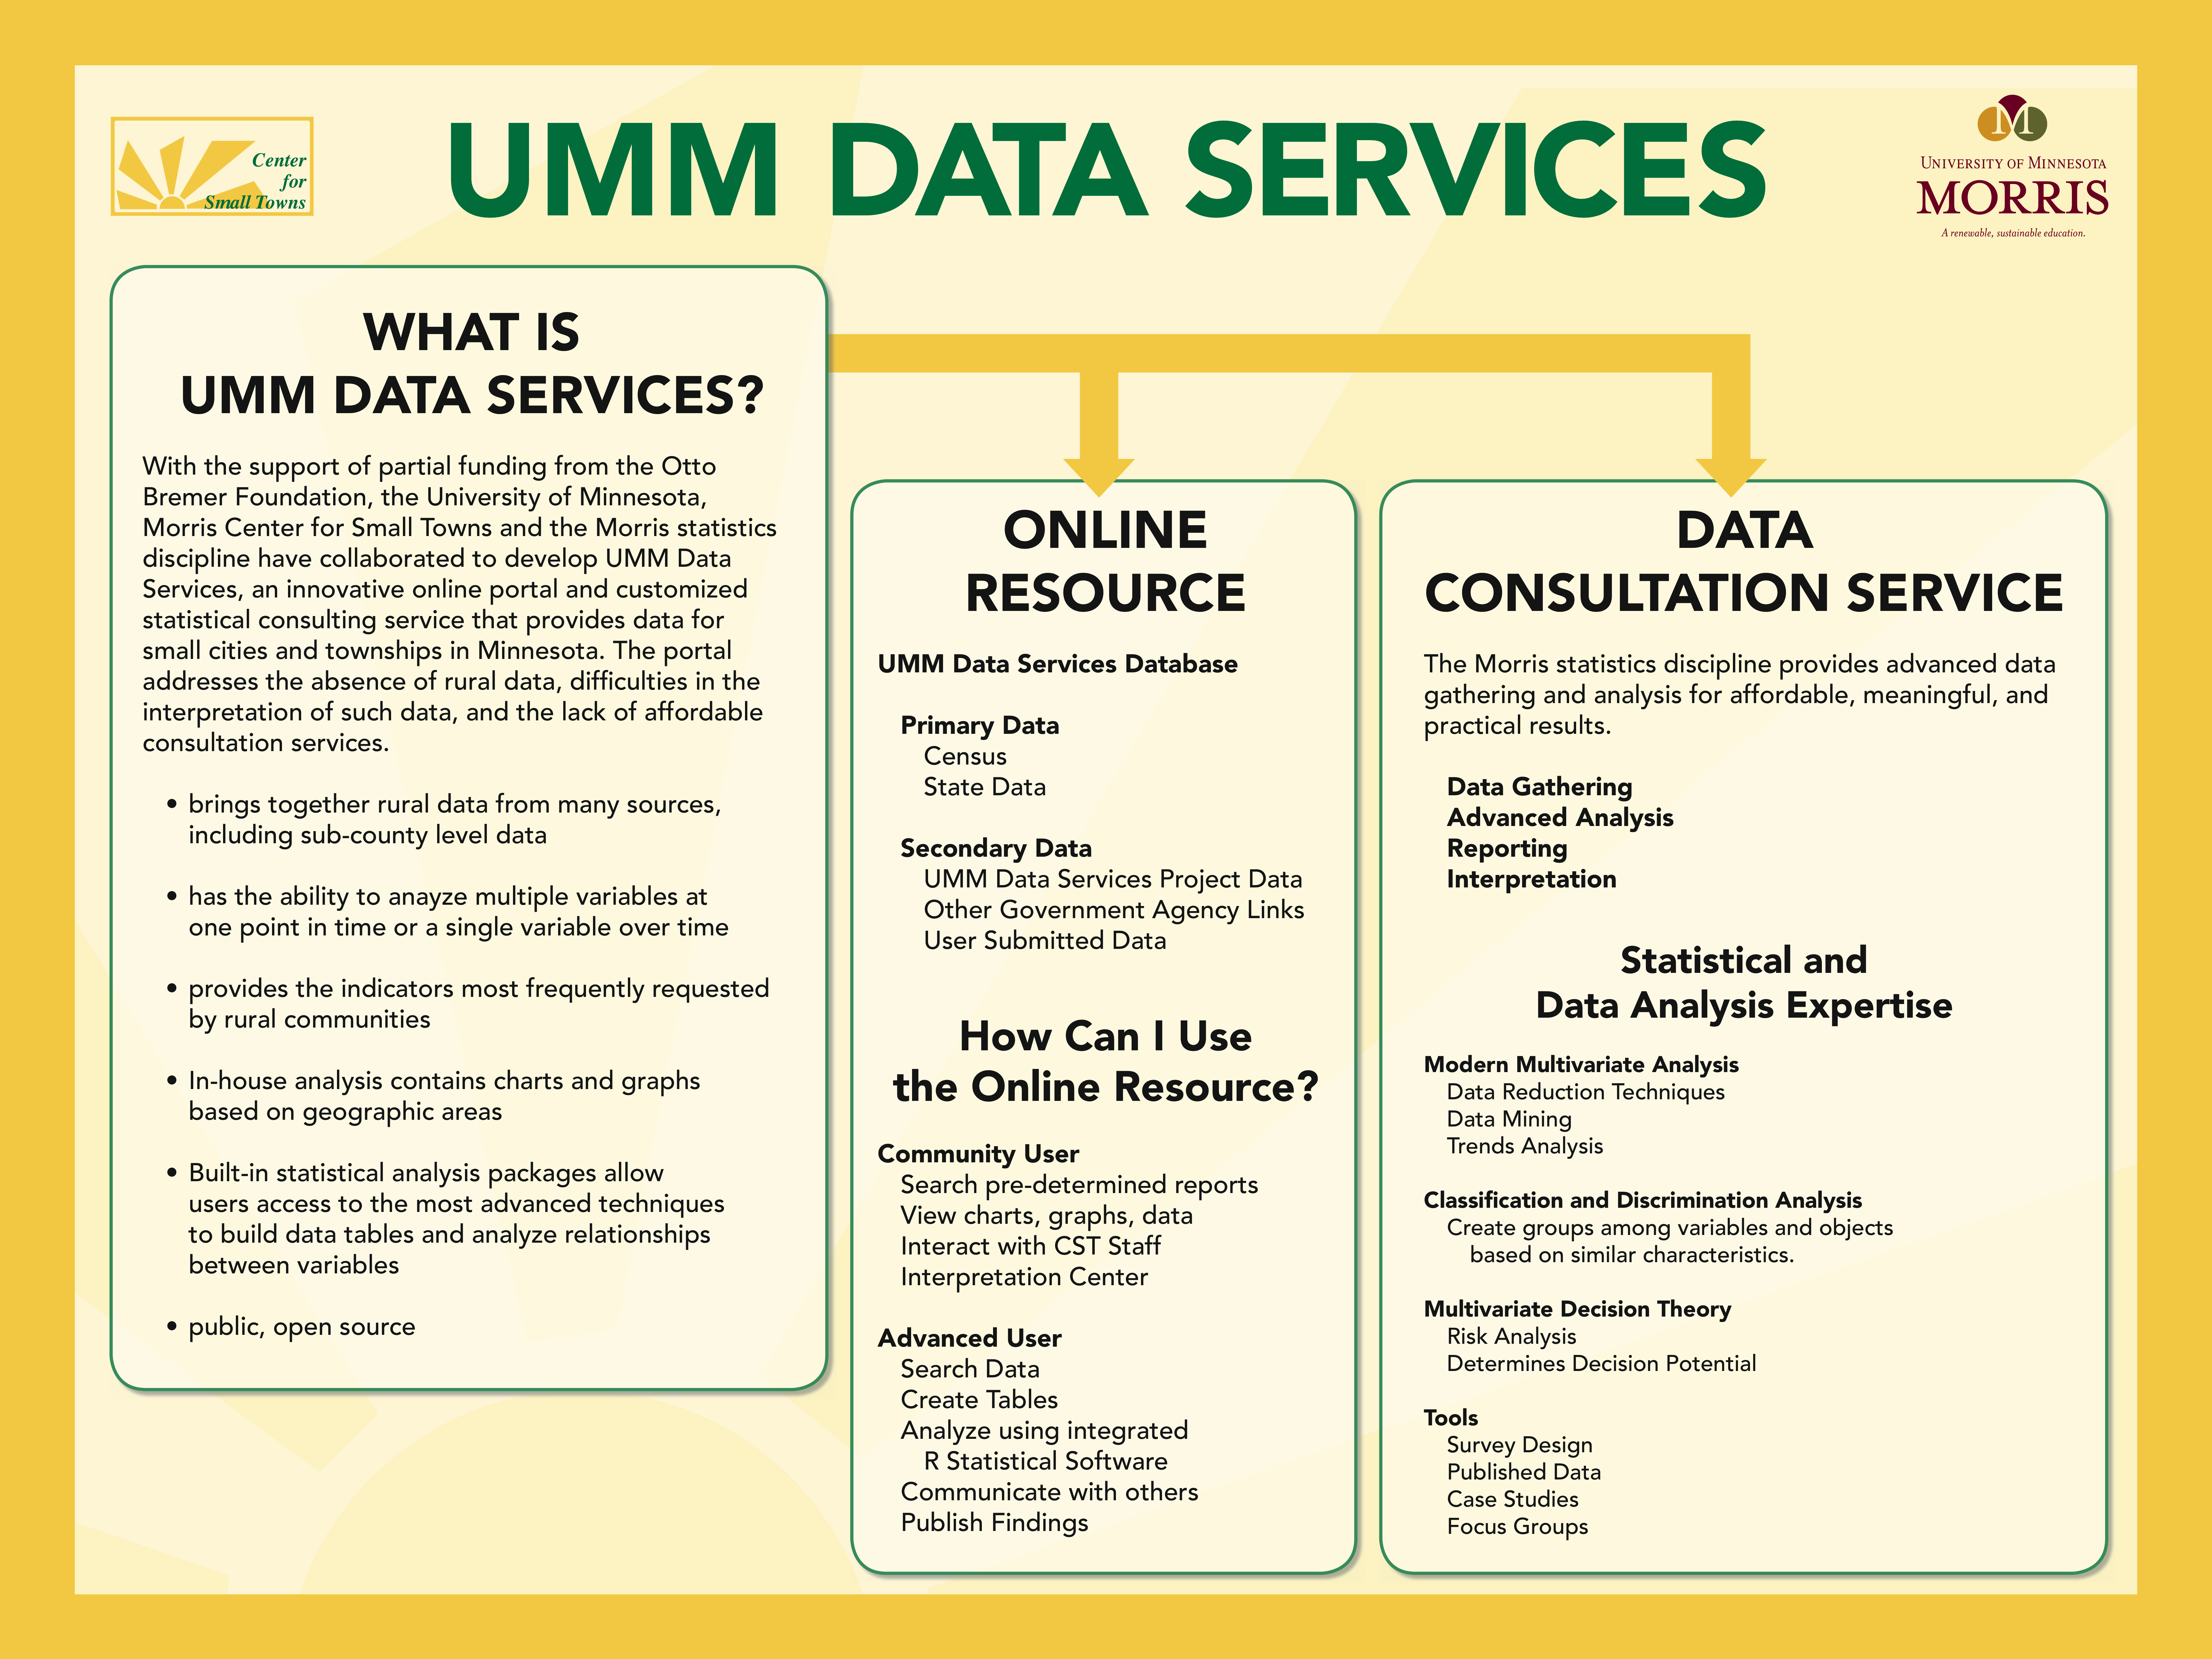 About Data Services Center (Poster)